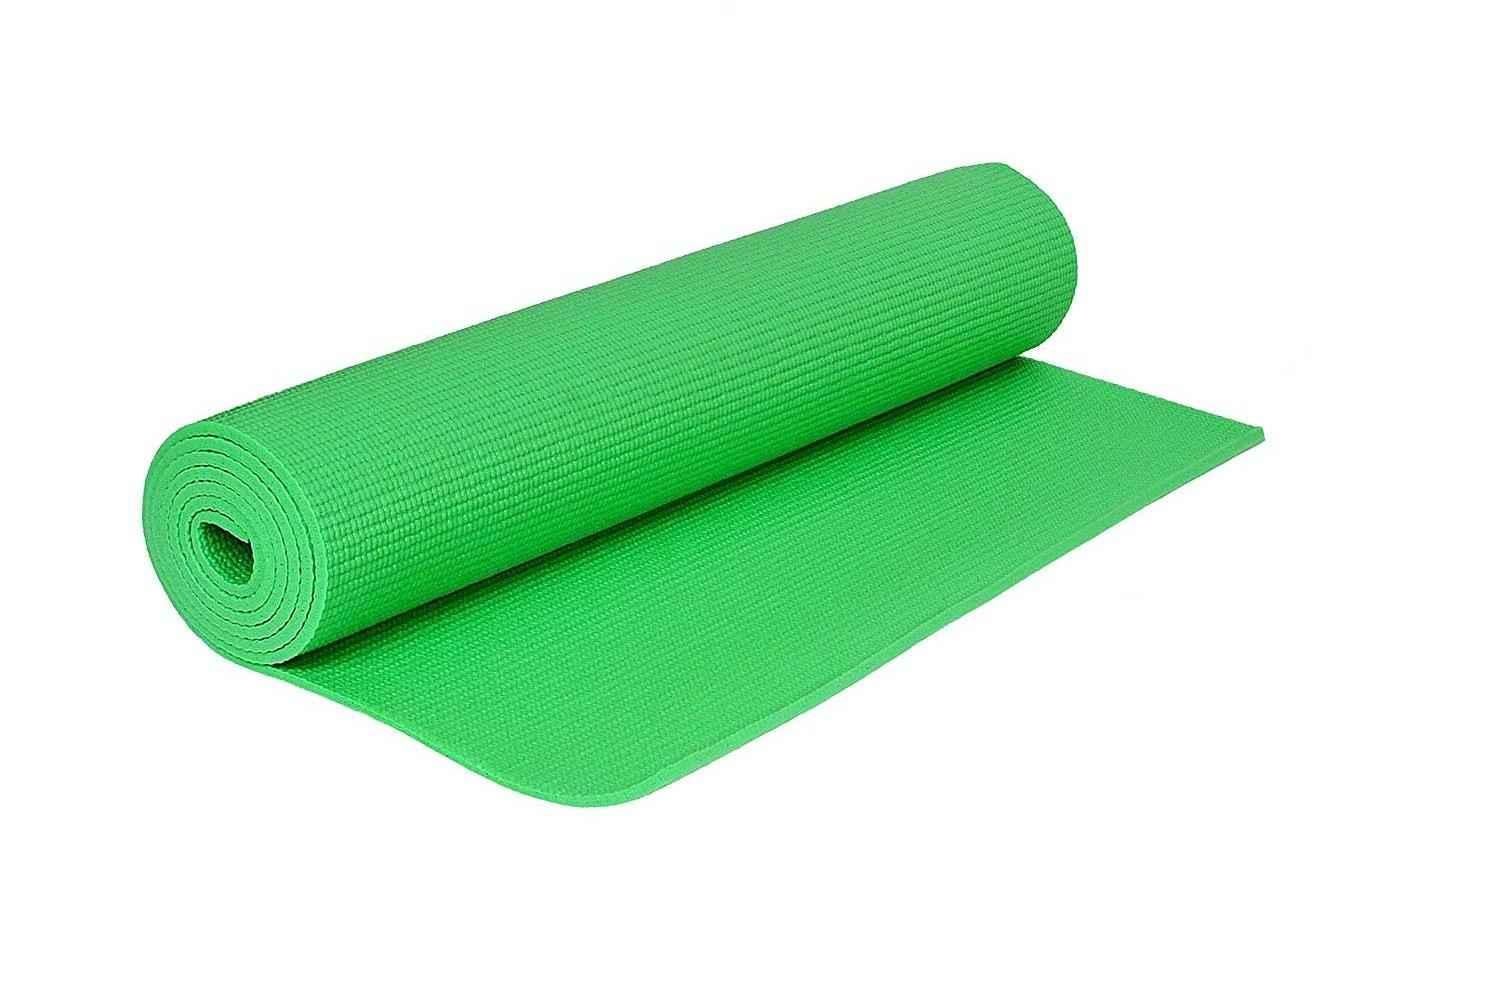 Buy Strauss 1730x610x4mm Green Yoga Mat with Cover, ST-1403 Online